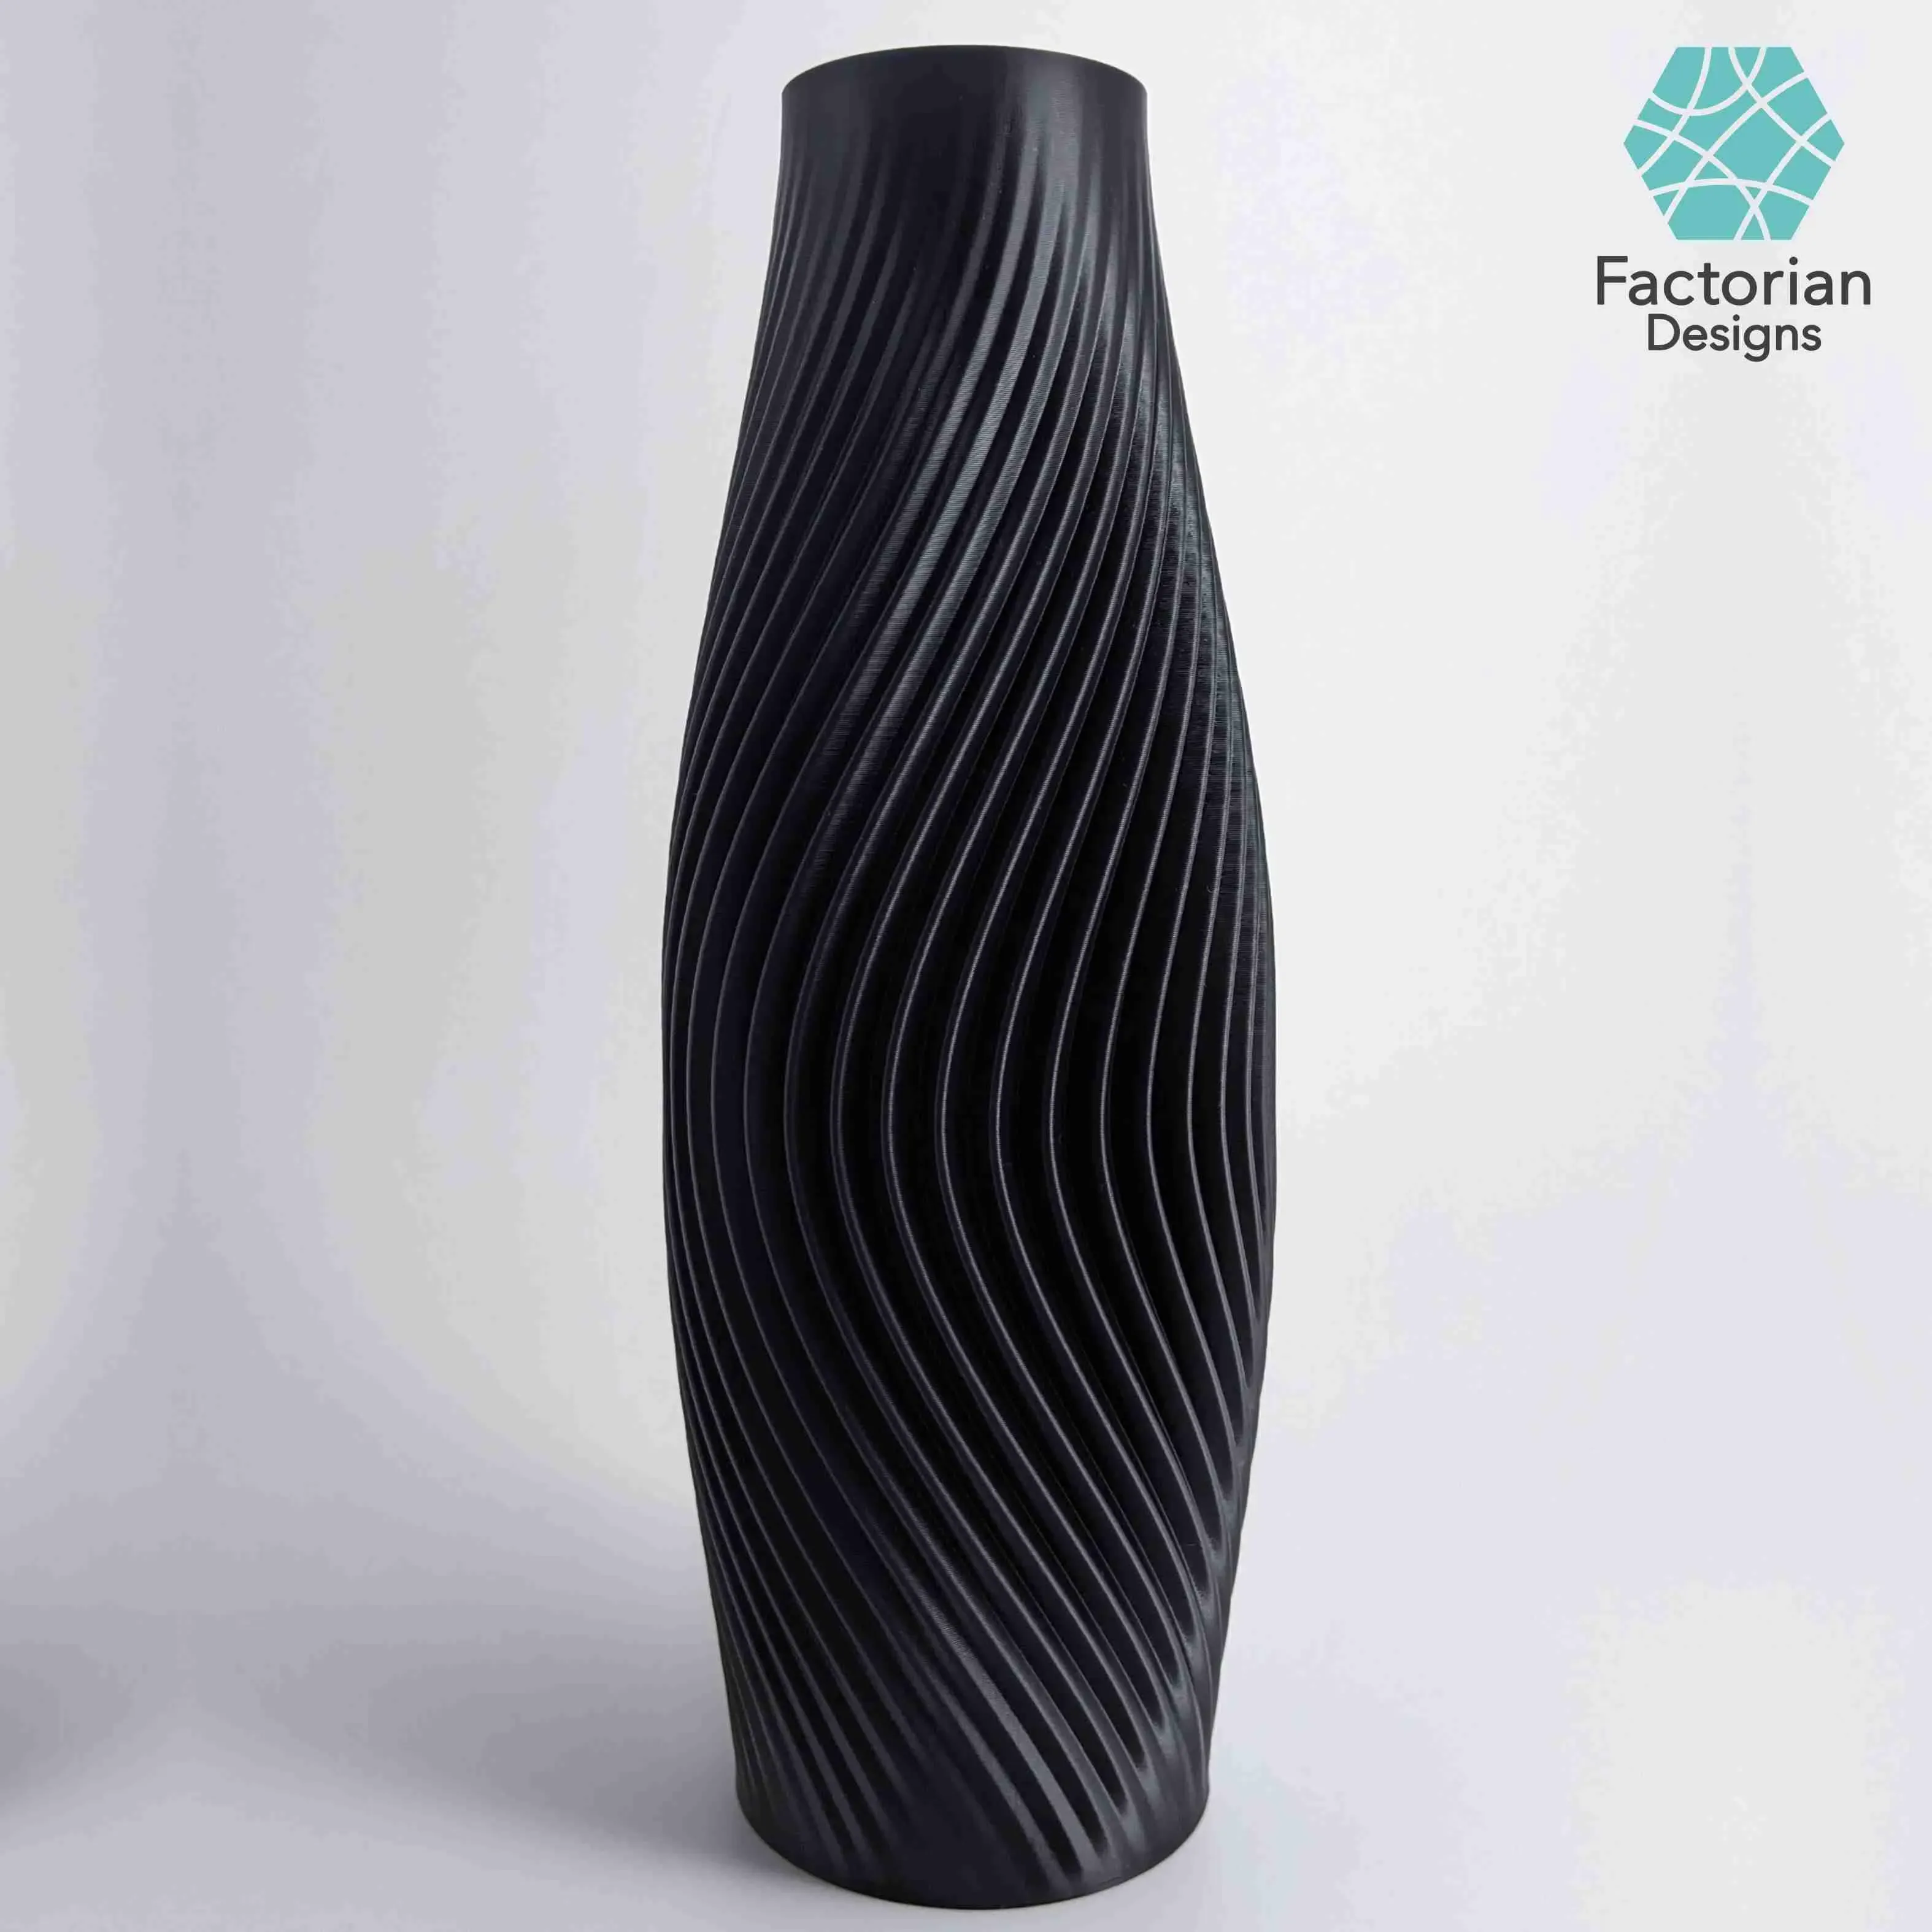 Stunning 3D Printed Vase: Add Style to Your Home Decor!